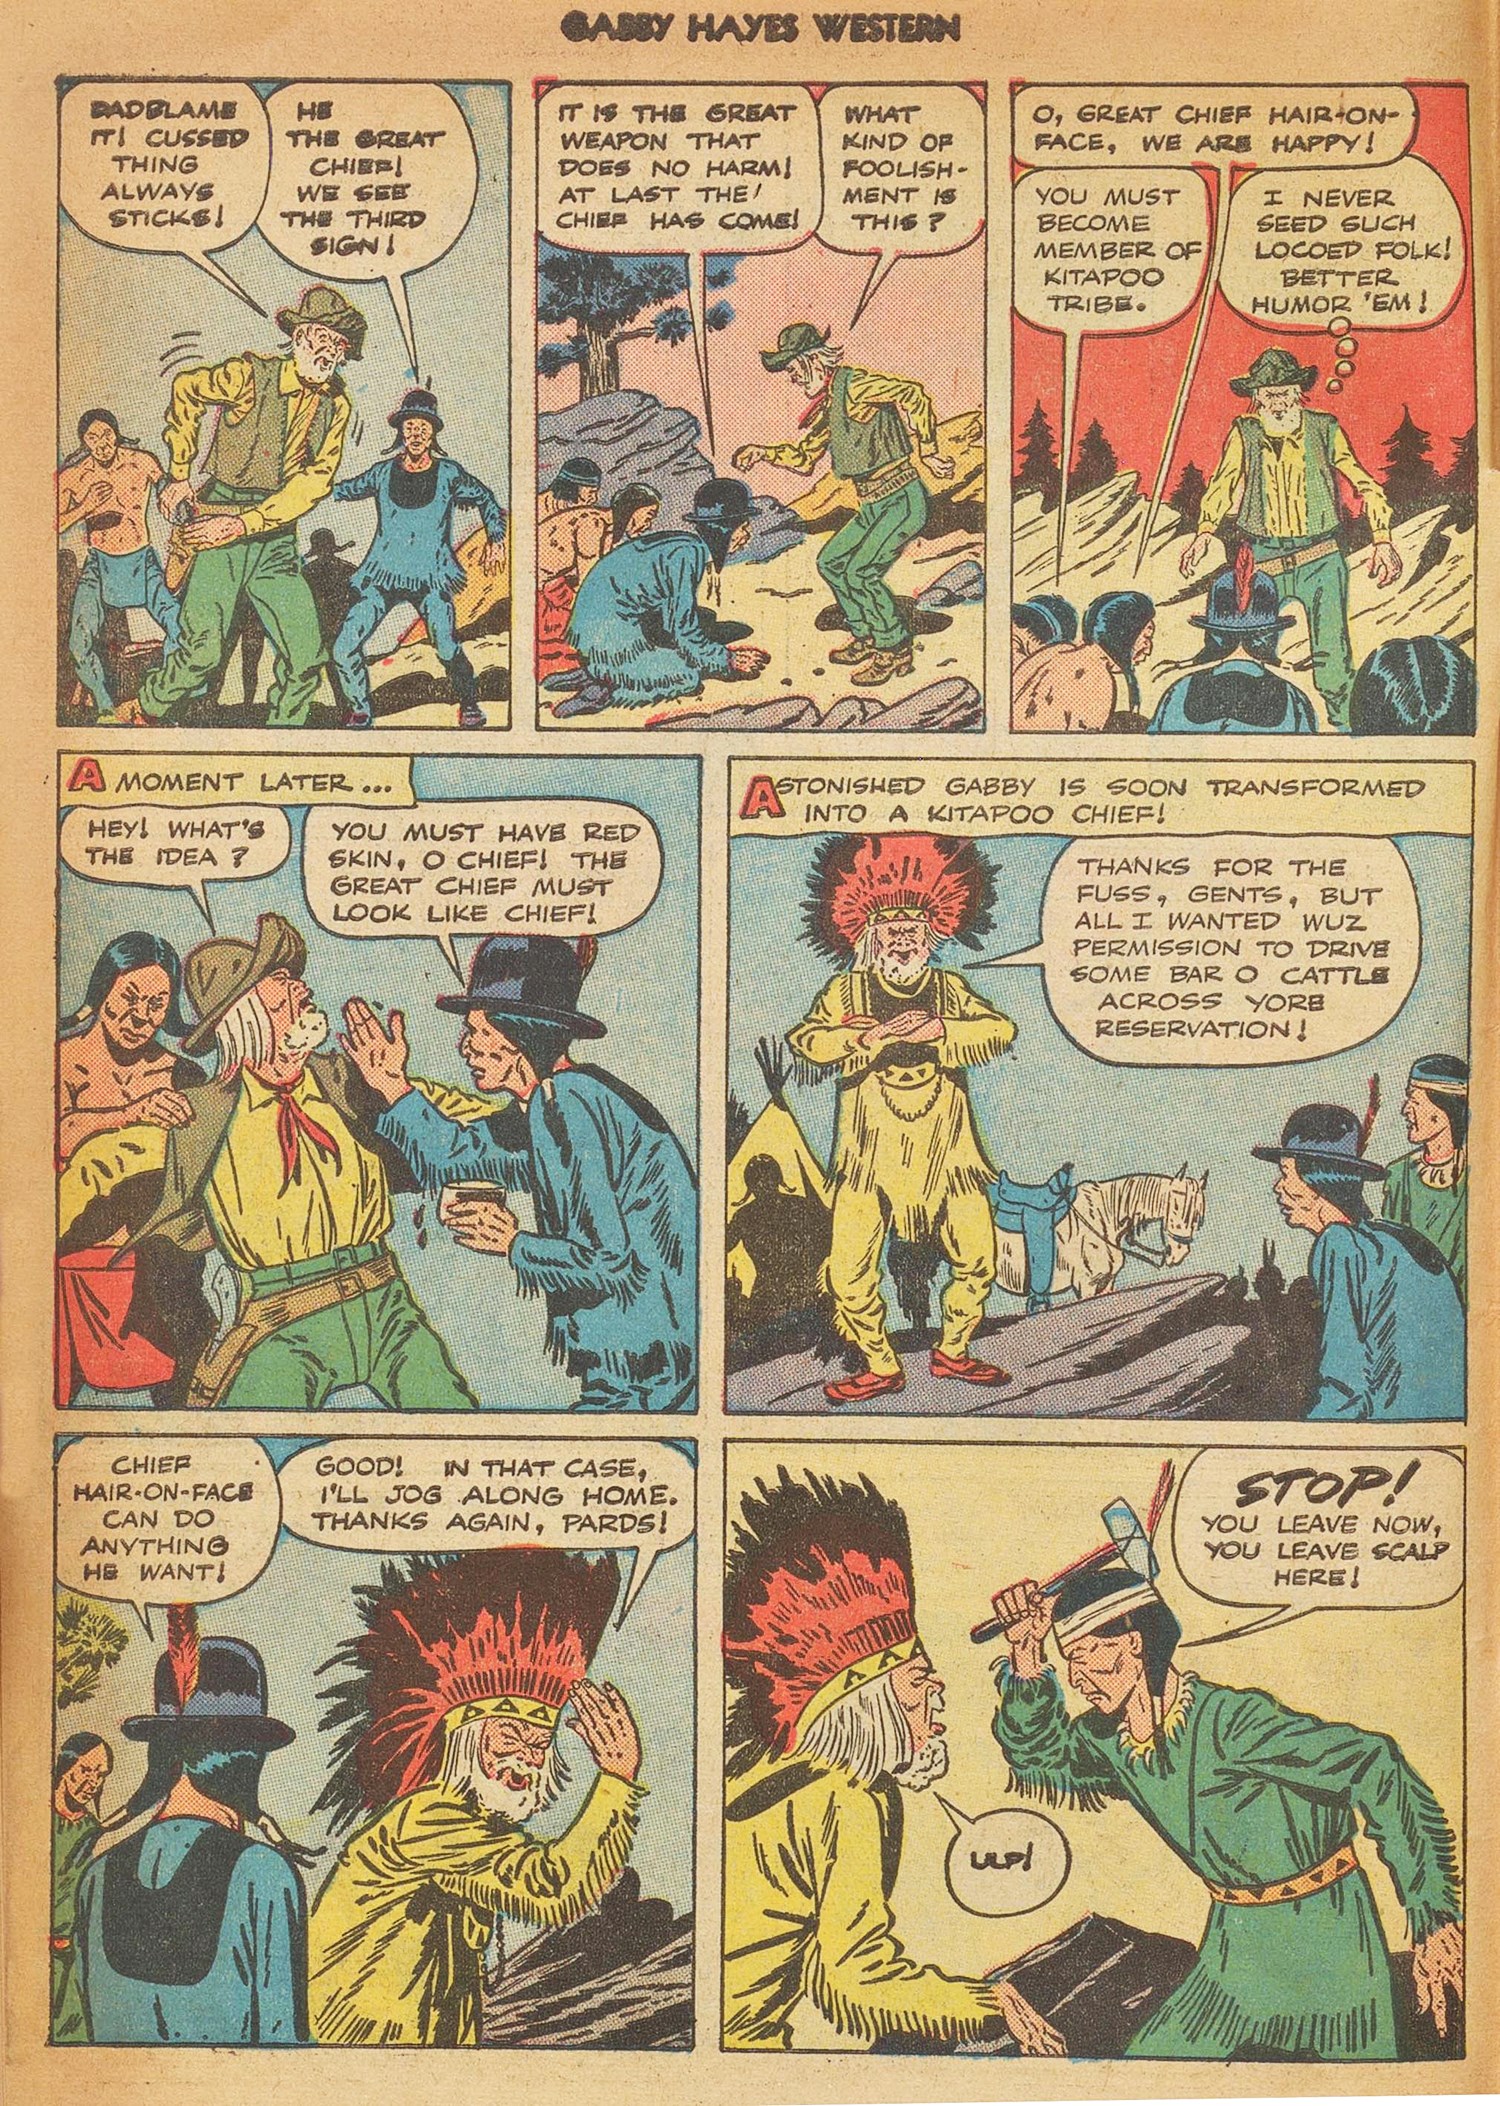 Read online Gabby Hayes Western comic -  Issue #3 - 6